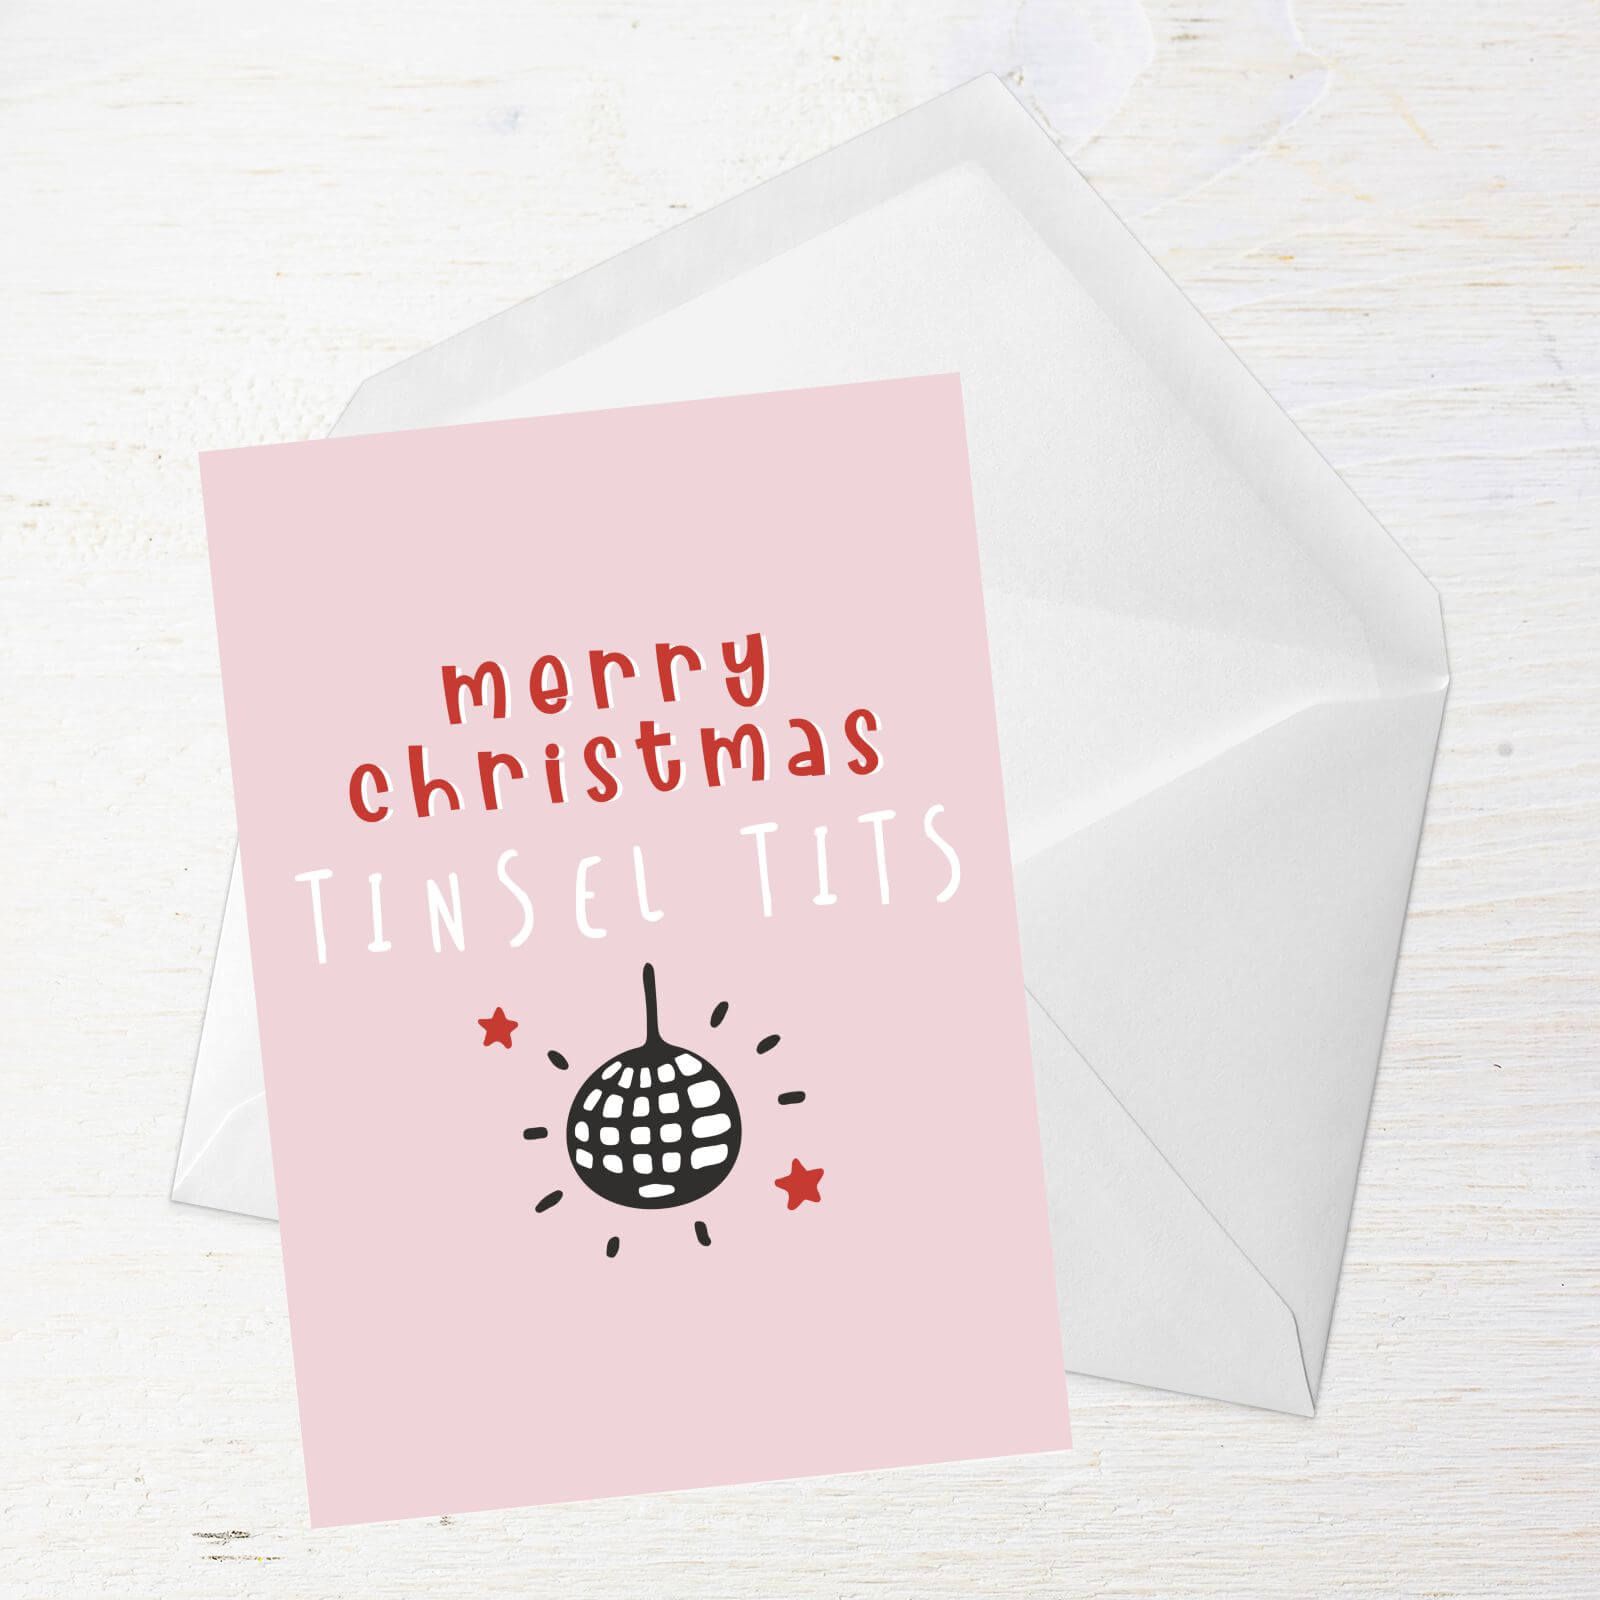 Merry Christmas Tinsel Tits Greetings Card - Giant Card